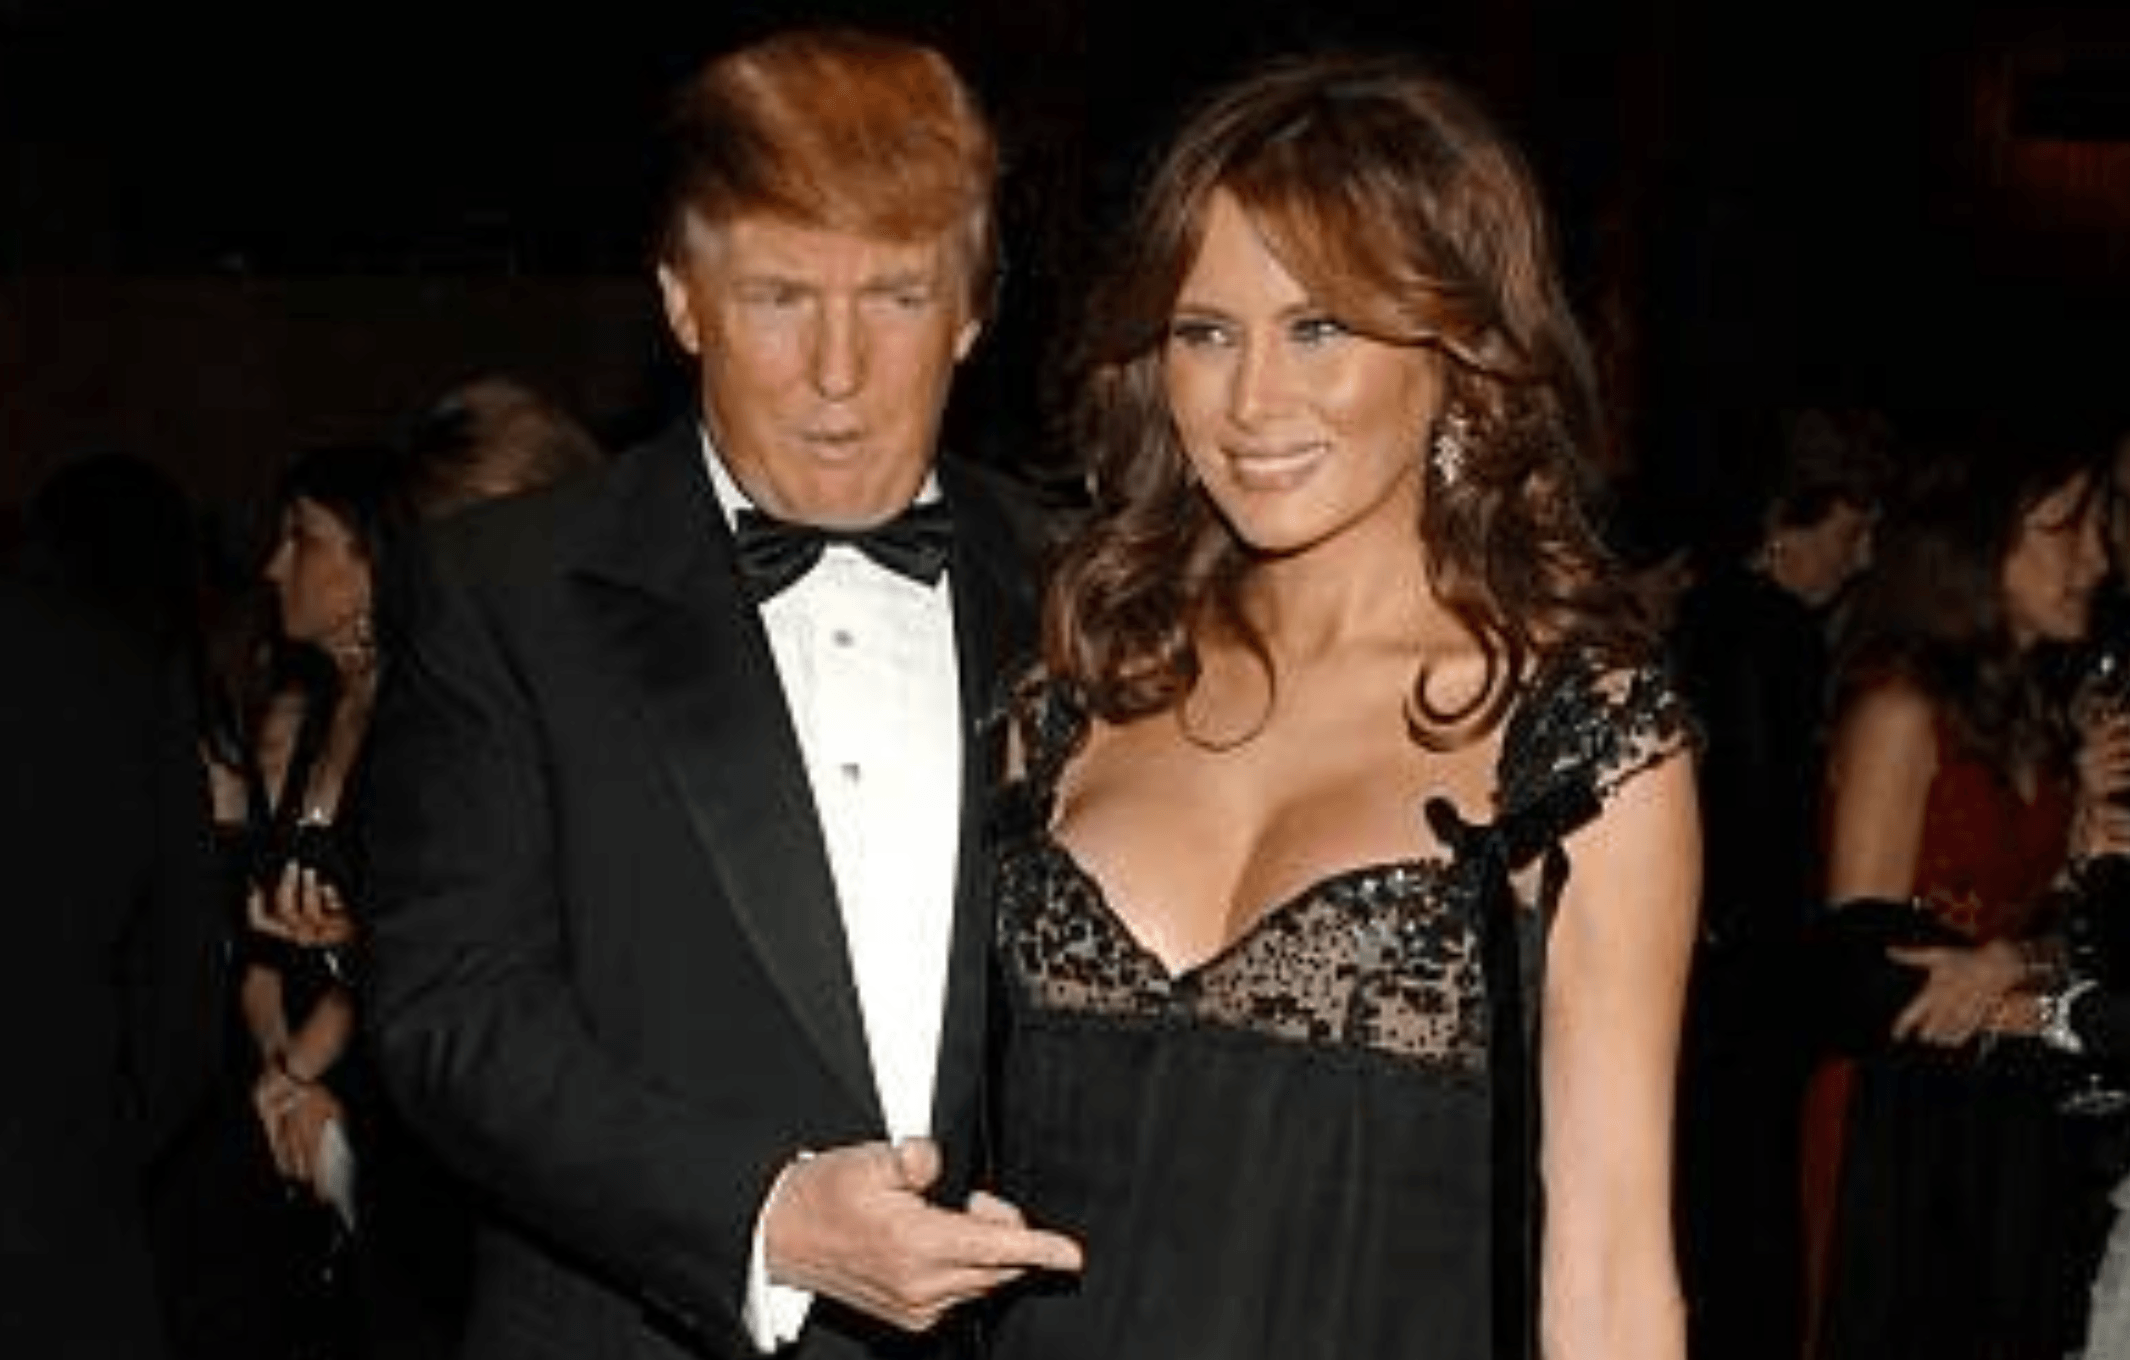 melania dating after